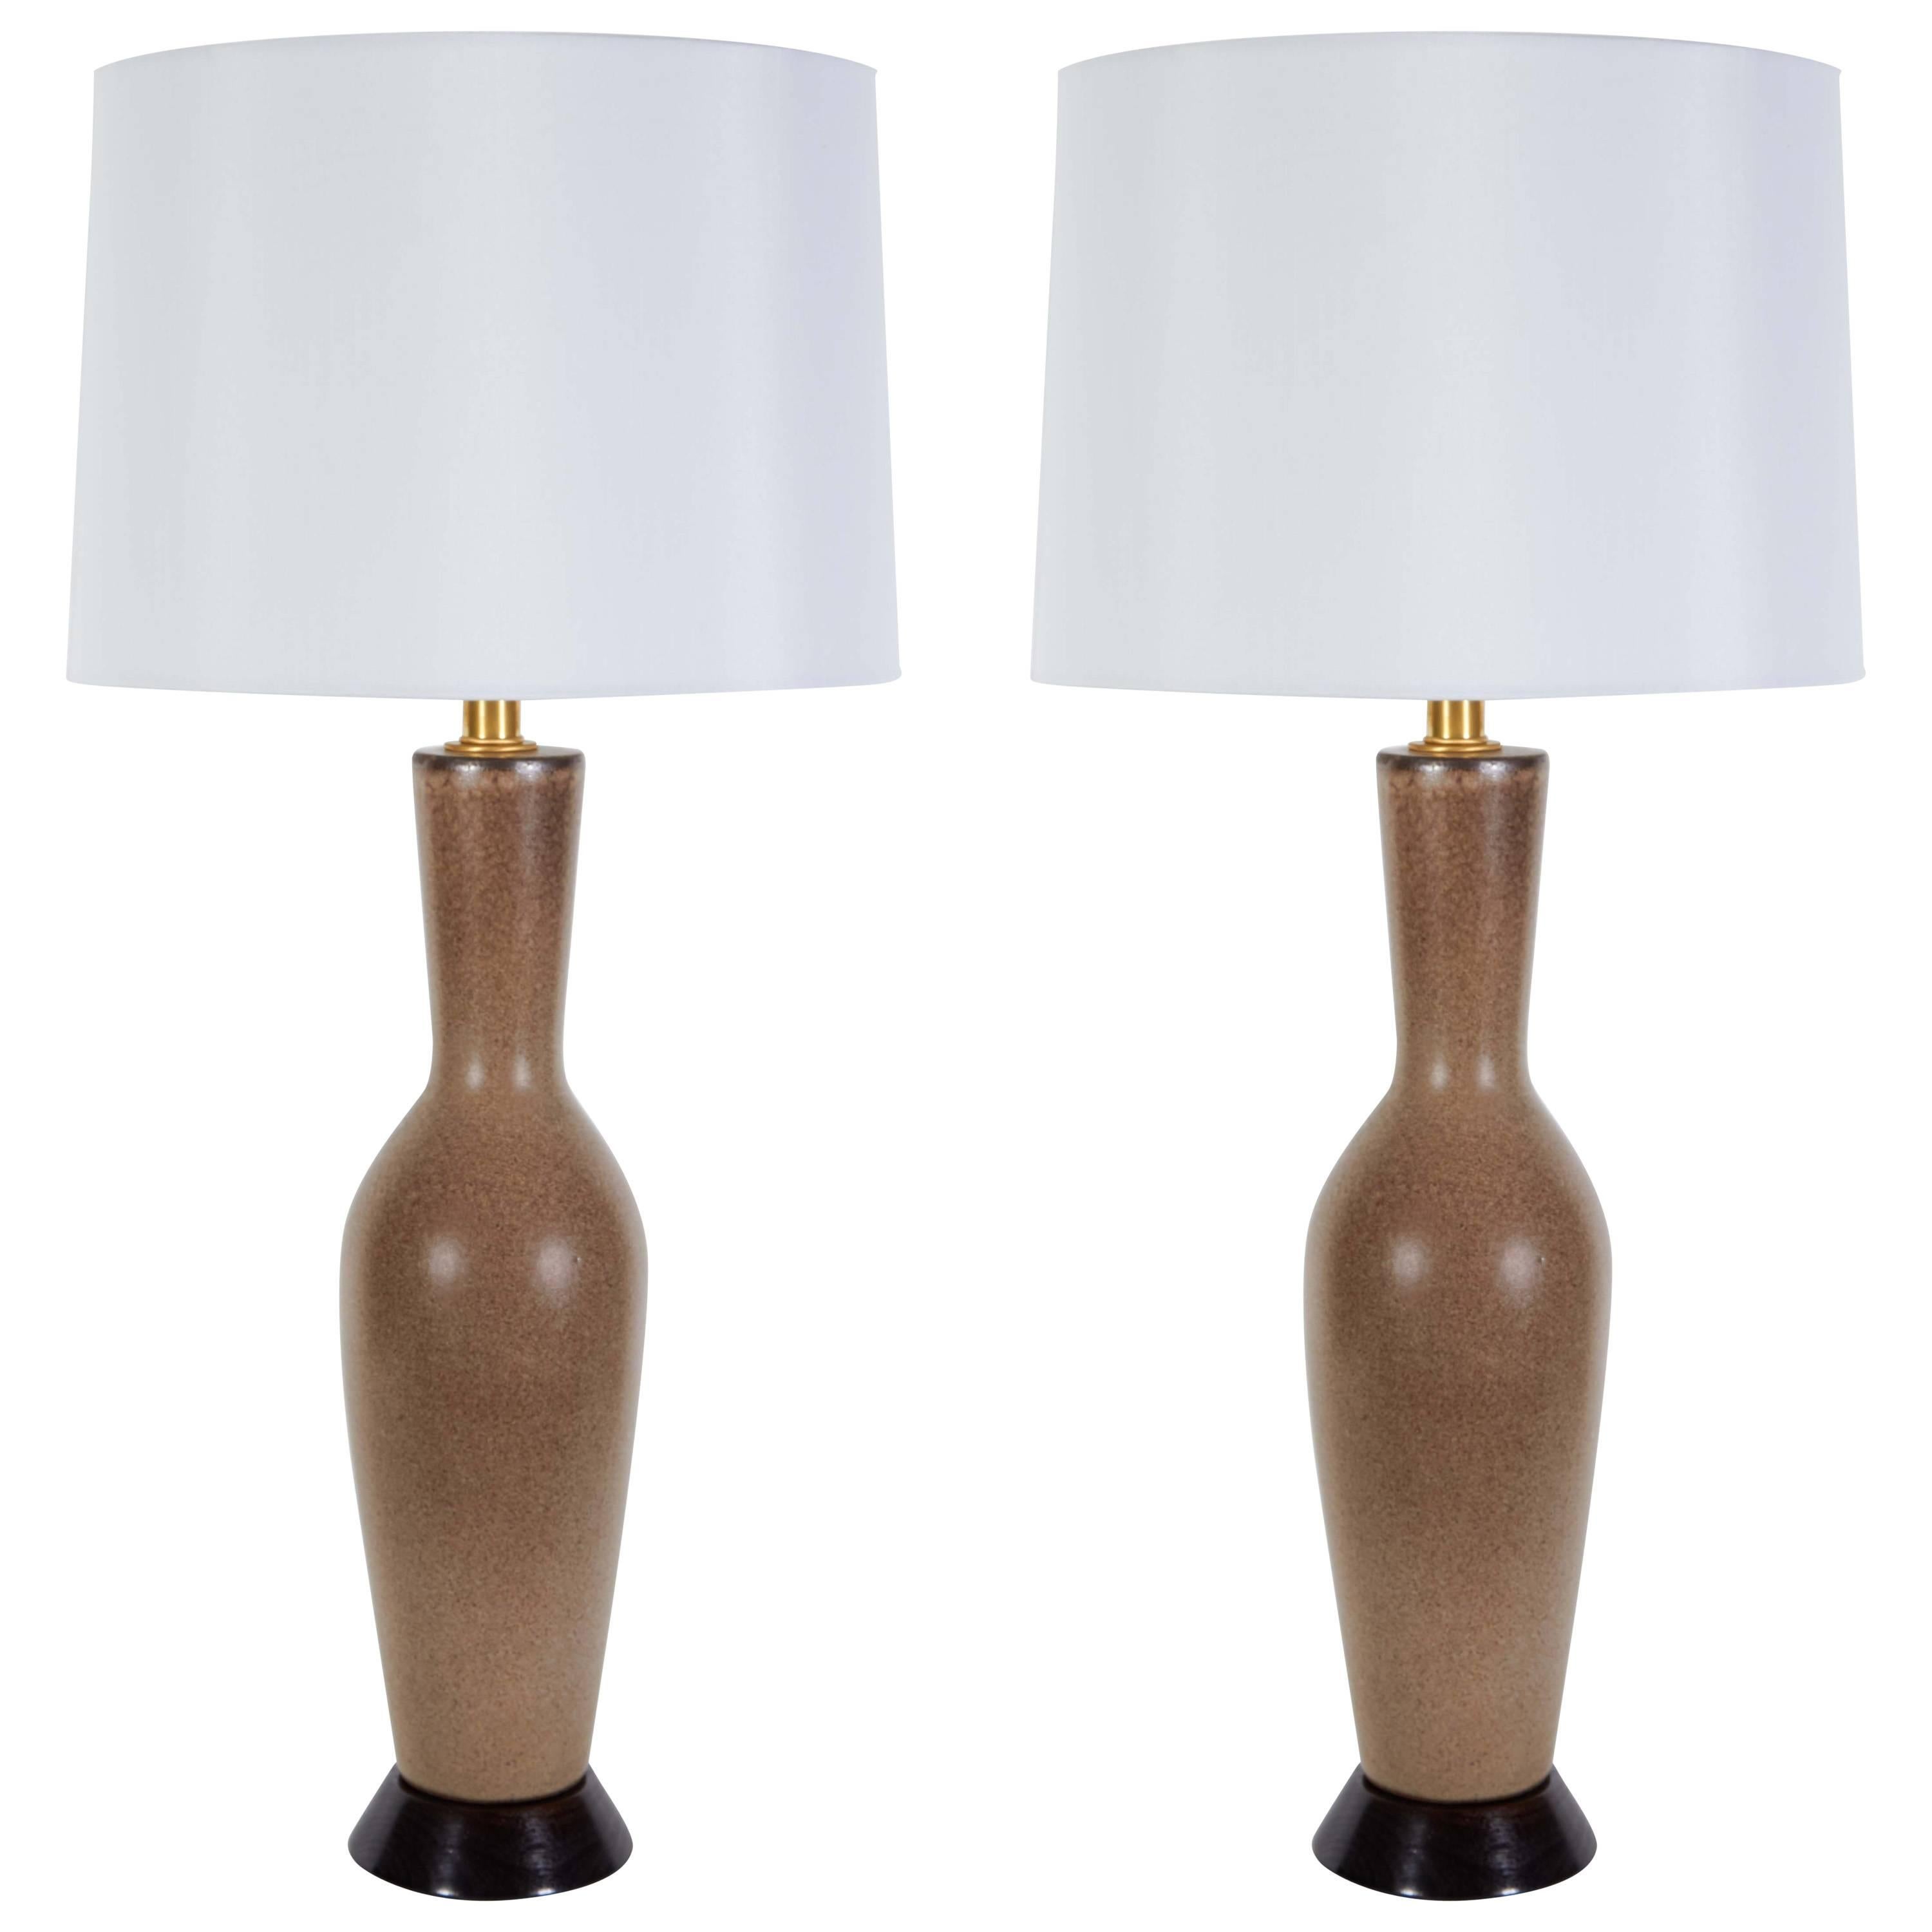 Italian Tan/Brown Speckled Glazed Lamps For Sale